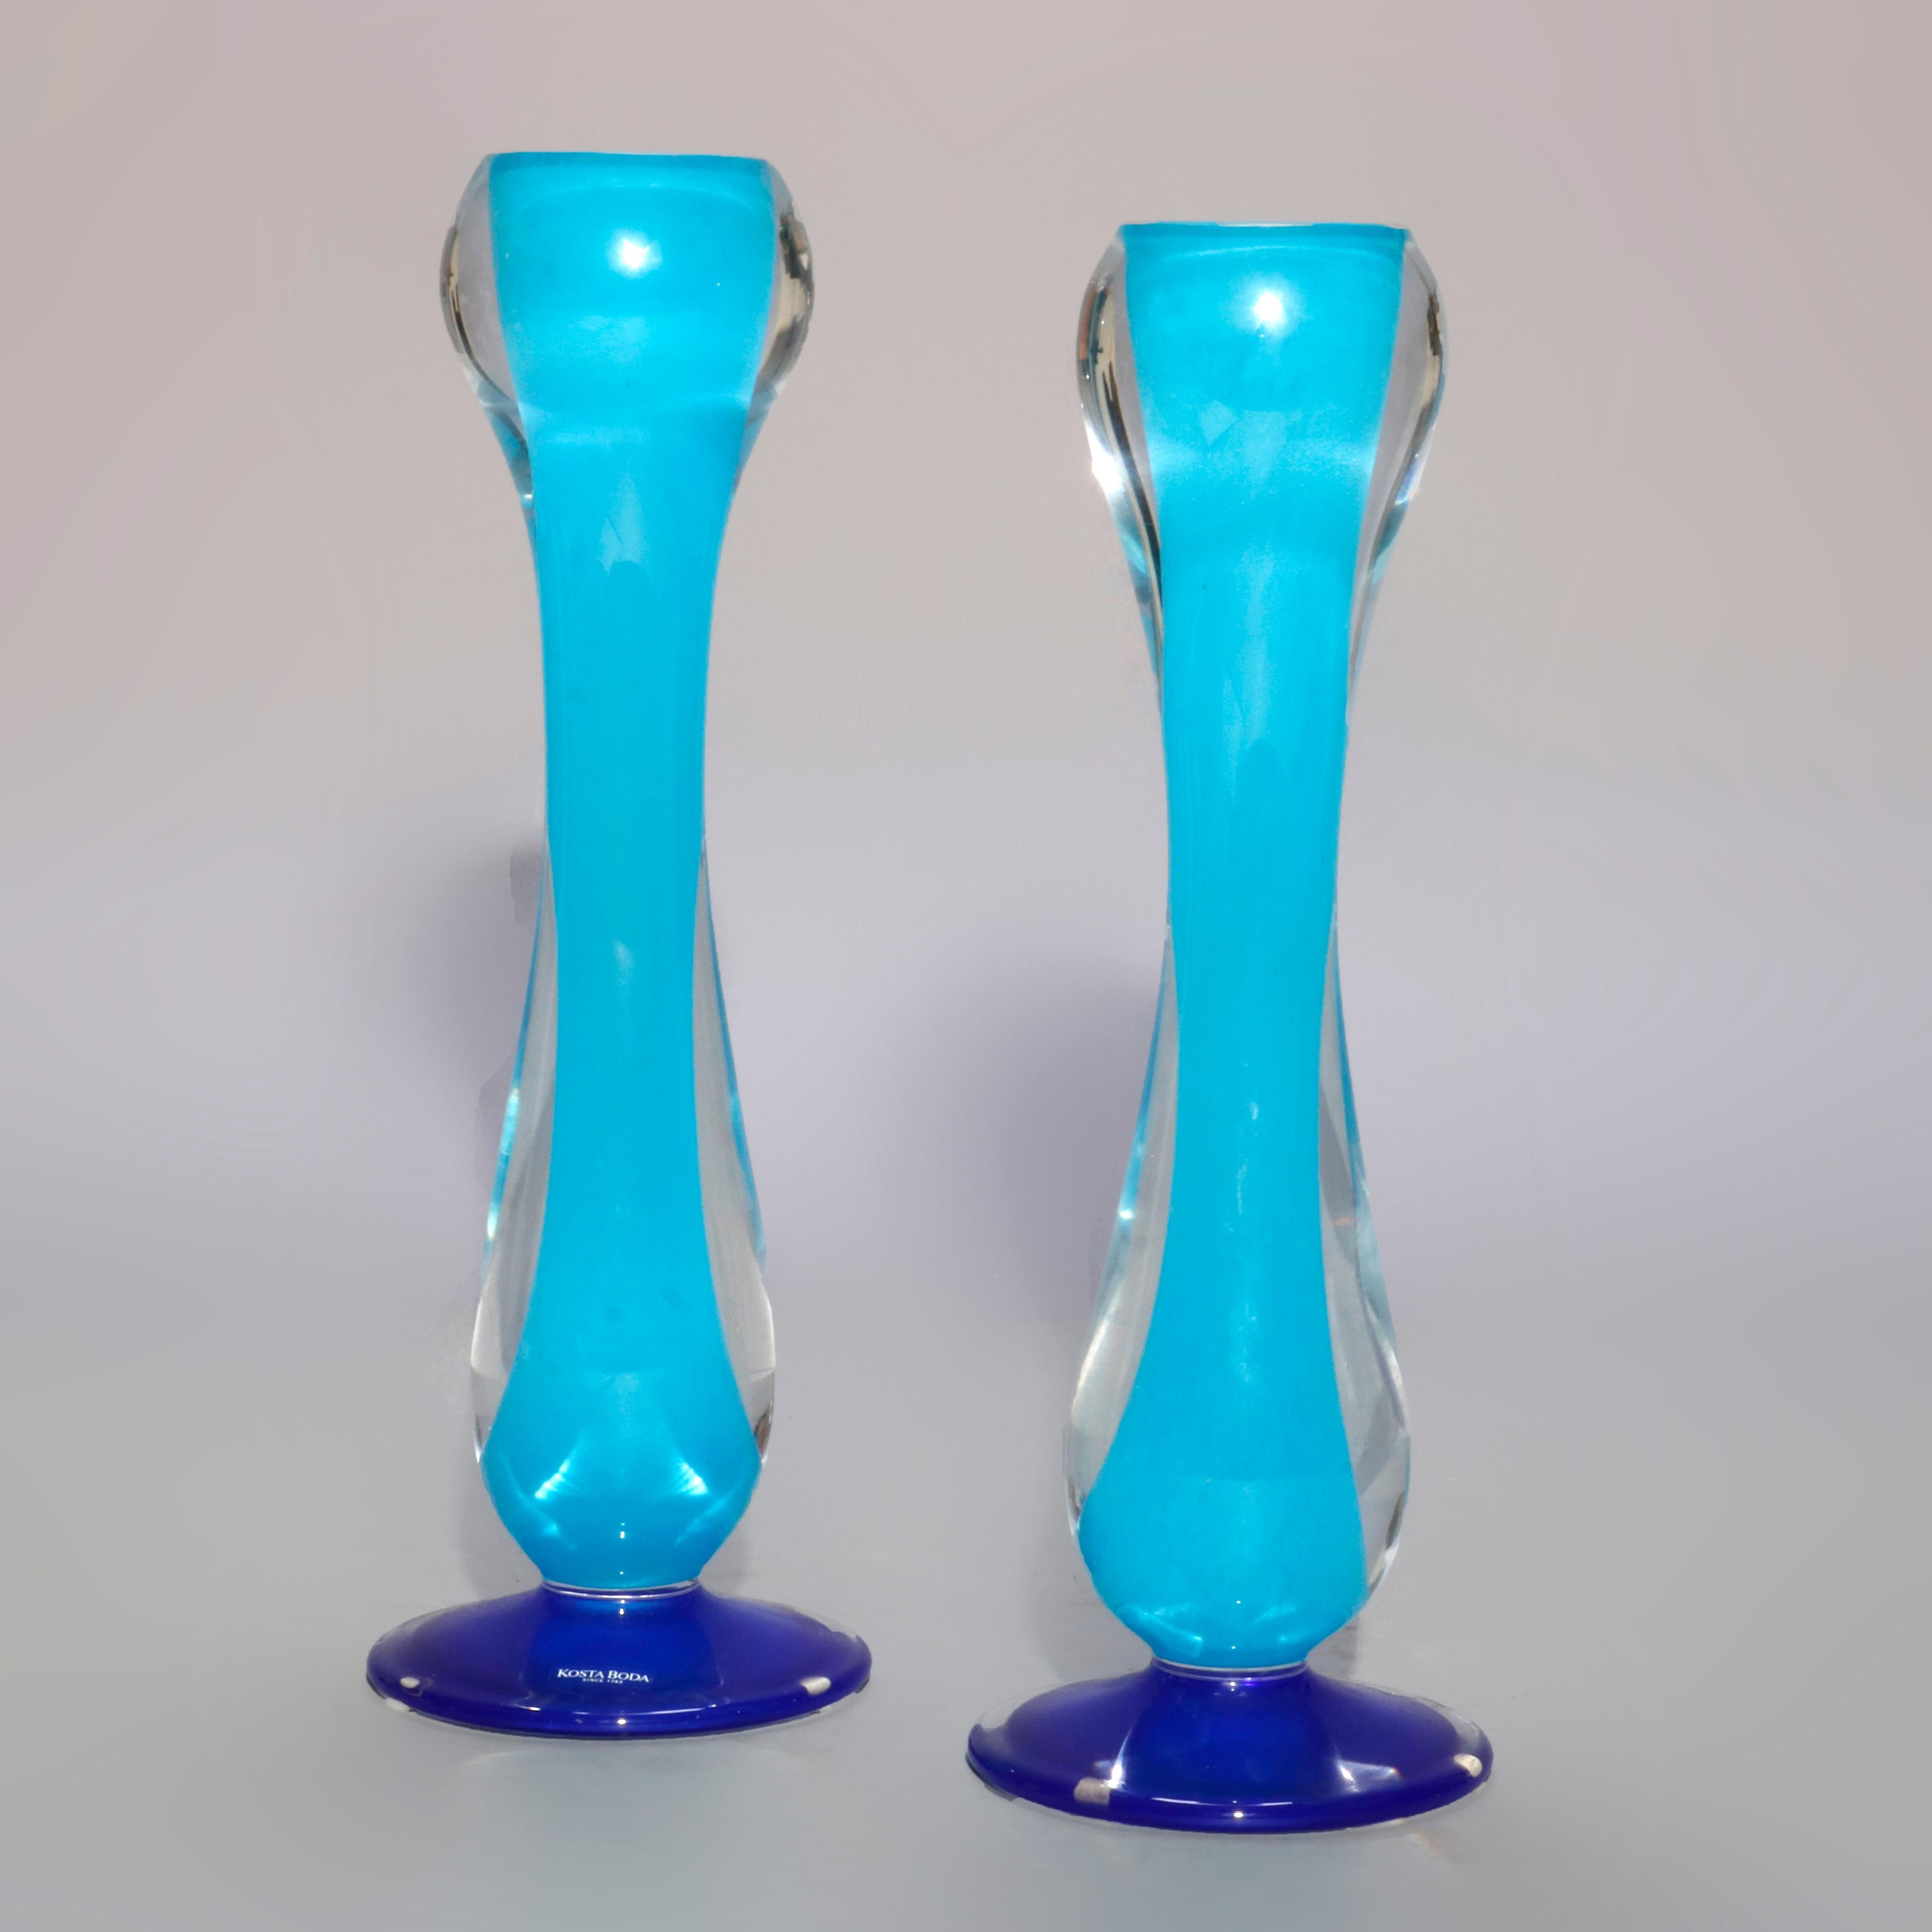 A Mid-Century Modern pair of candlesticks by Kosta Boda offer silhouette form in blue and colorless art glass, maker mark as photographed, circa 1960

Measures: 1) 12.5